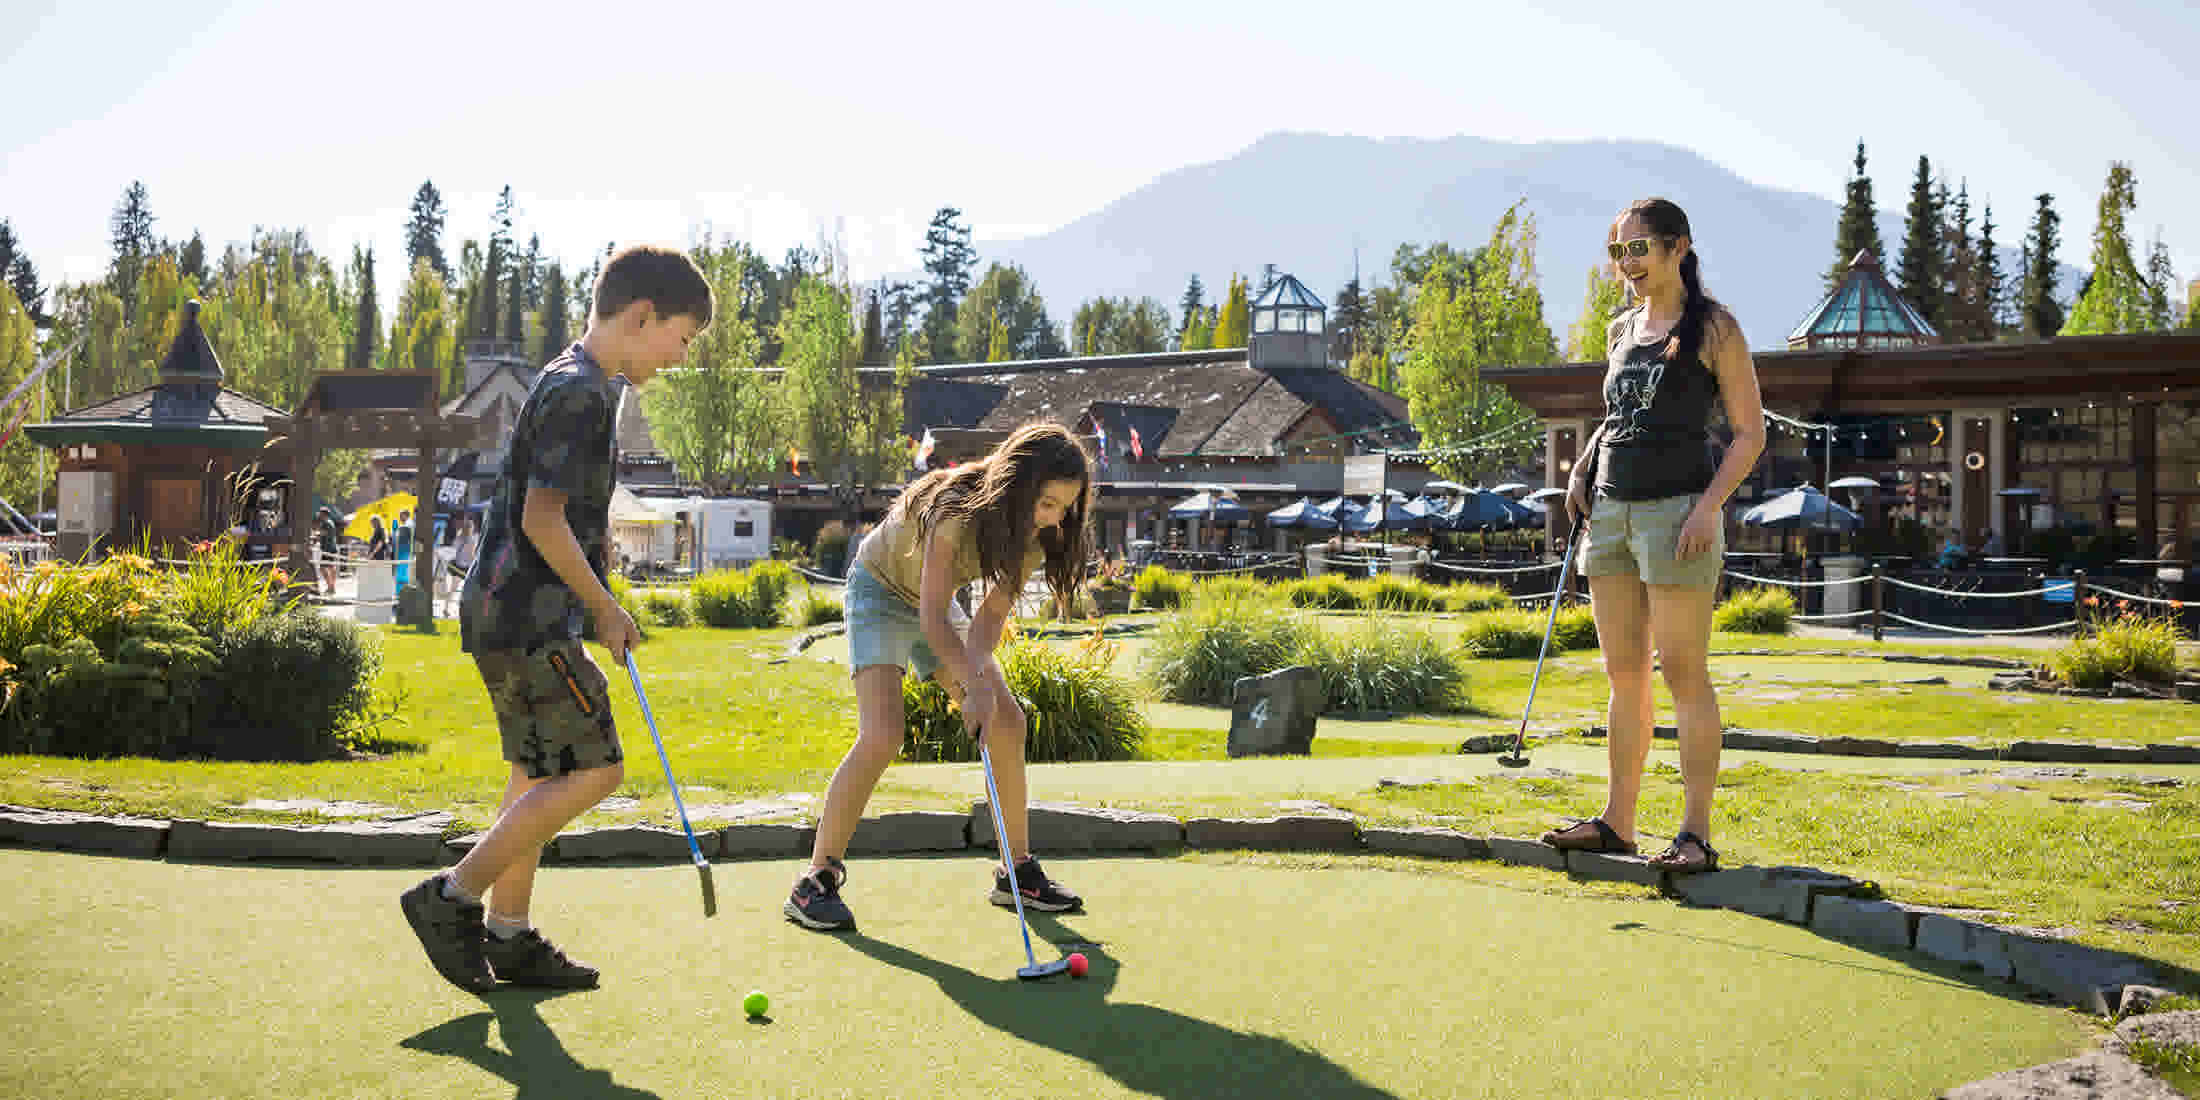 Two kids and a teen playing mini golf at the Adventure Zone in Whistler